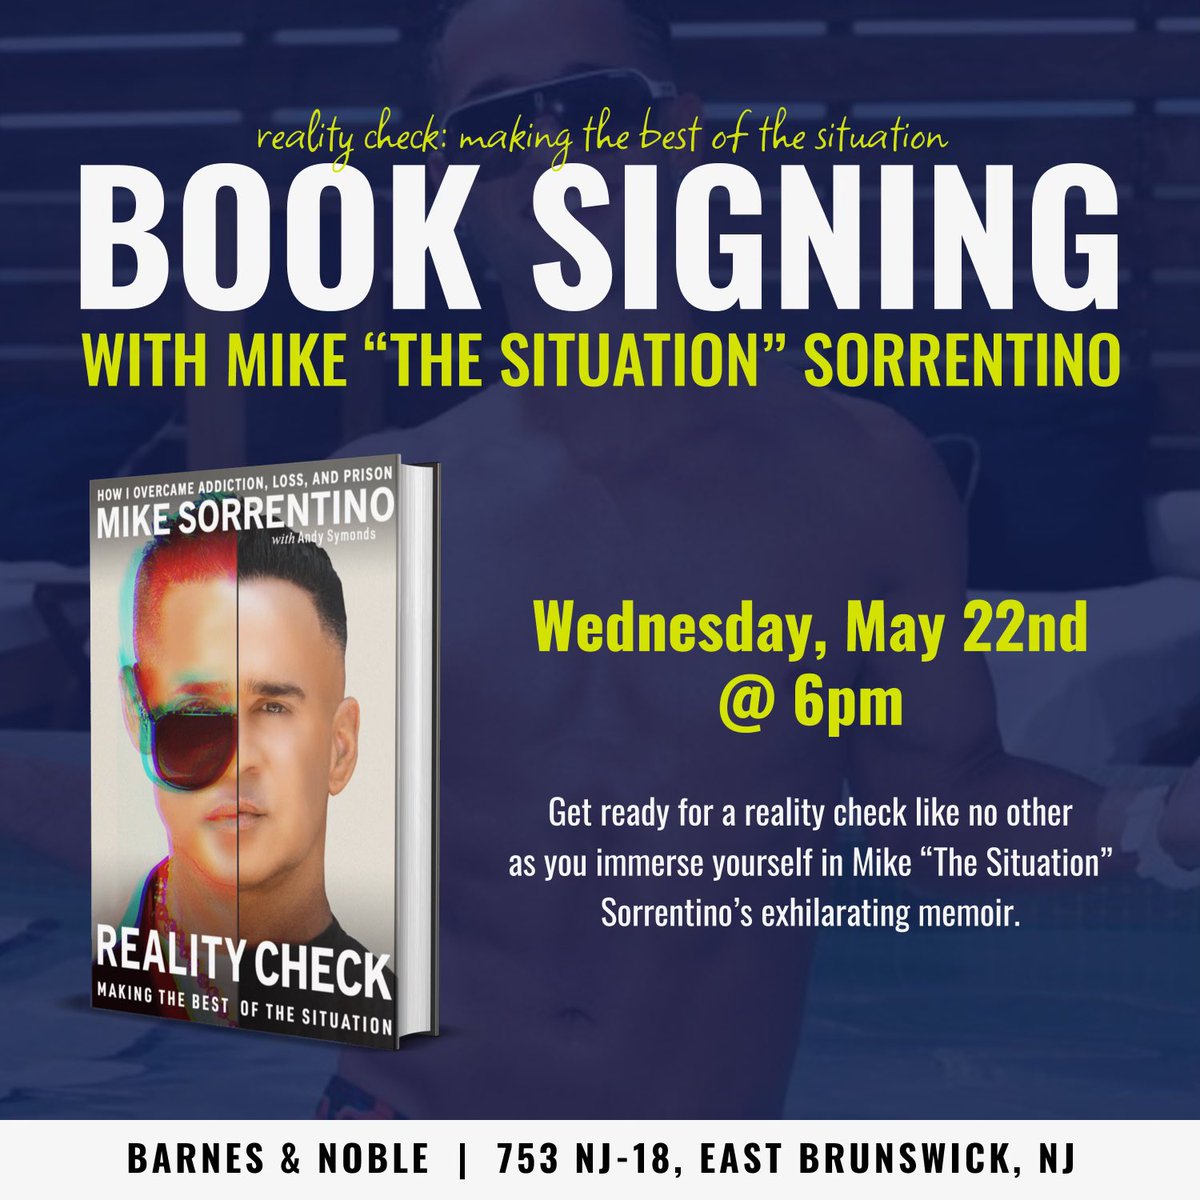 All Jersey Shore fans report to @BNEastBrunswick this Wednesday for a Reality Check book signing📚😎
We have a Situation‼️

Ticket 🎫 Info:

stores.barnesandnoble.com/event/97800621…

Excited to meet you all 📚